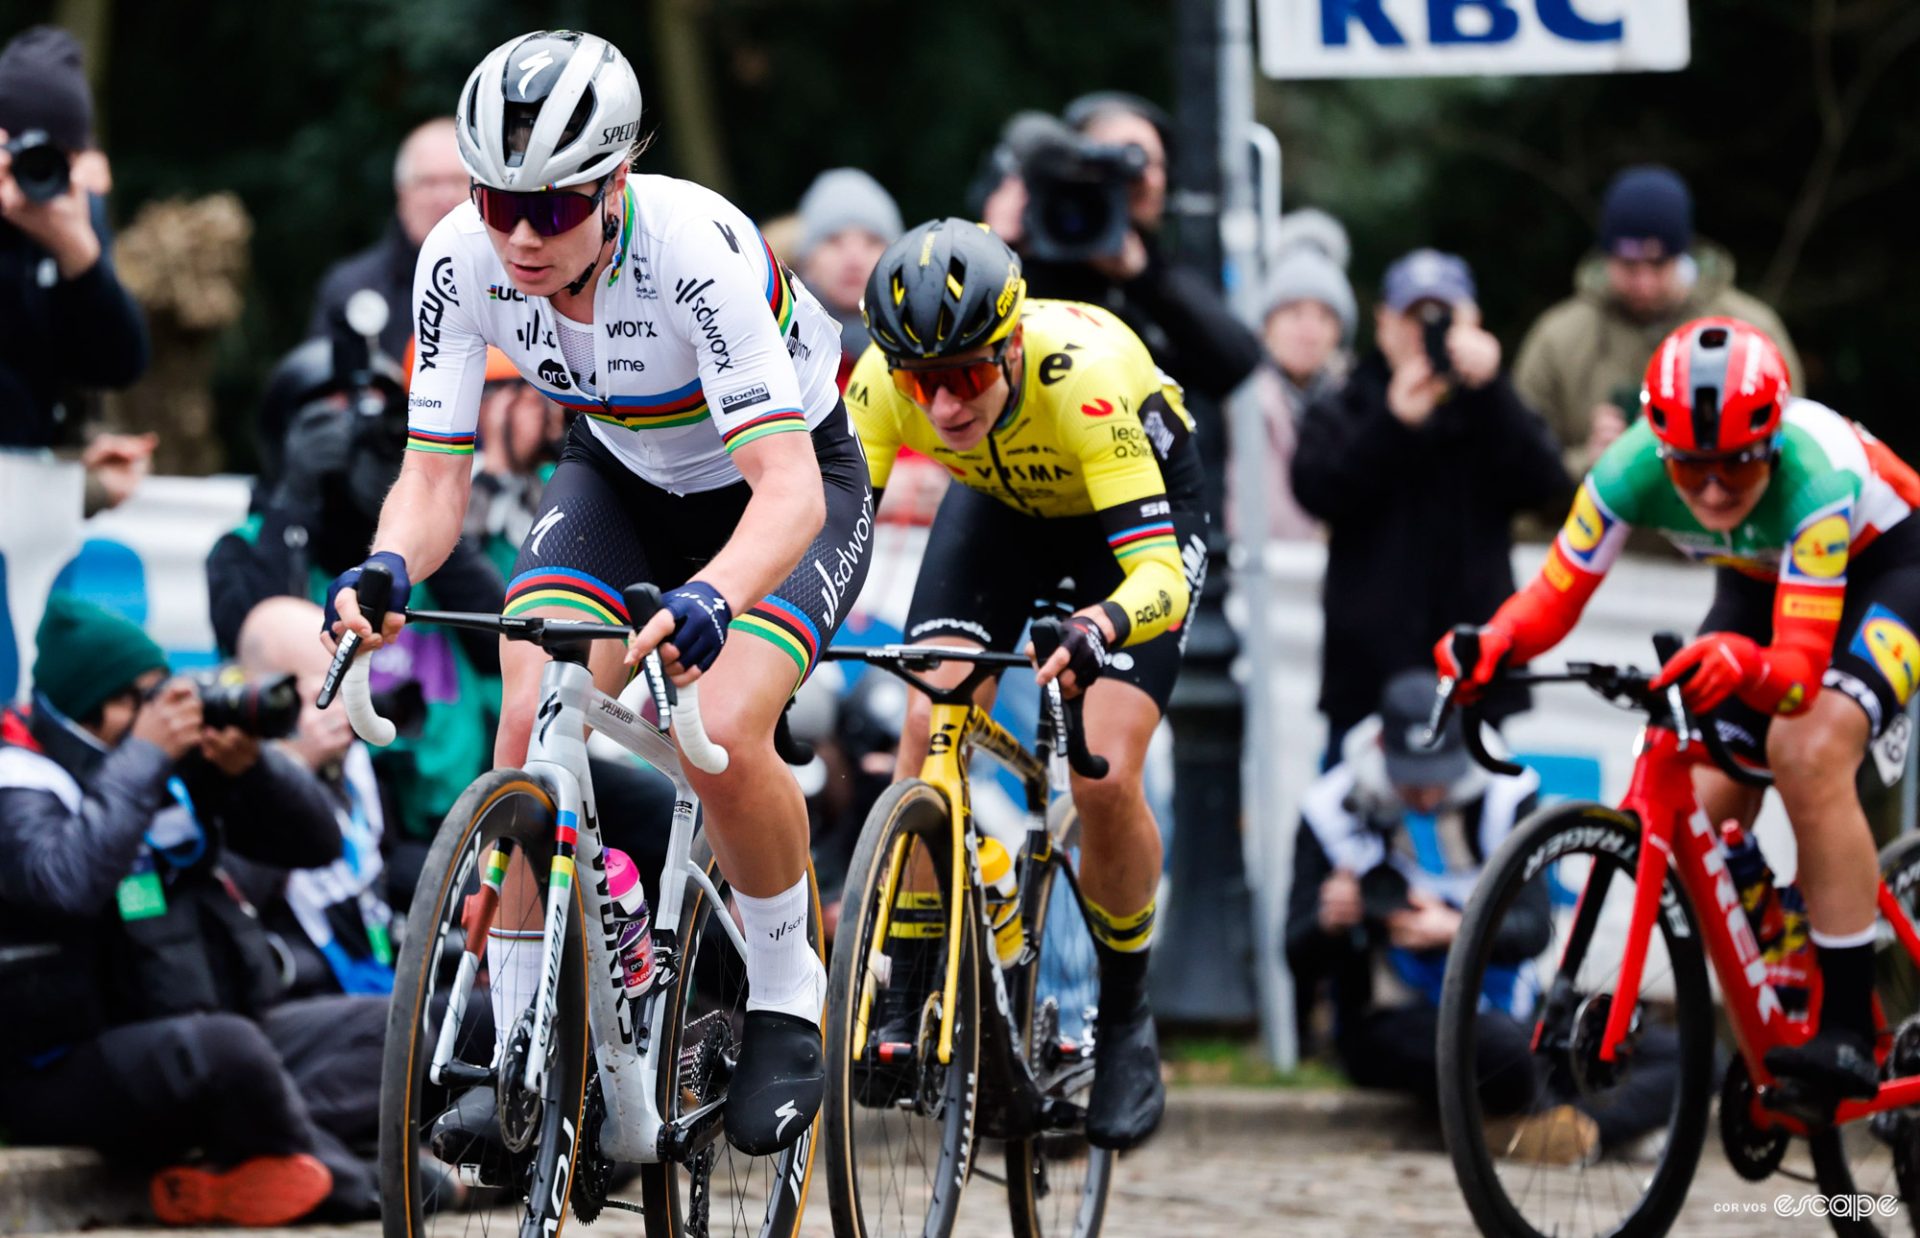 A confident Lotte Kopecky leads Marianne Vos on the Kapelmuur. The World Champion is climbing in the saddle, Vos on her wheel, while behind, Elisa Longo Borghini grimaces to keep the pace.